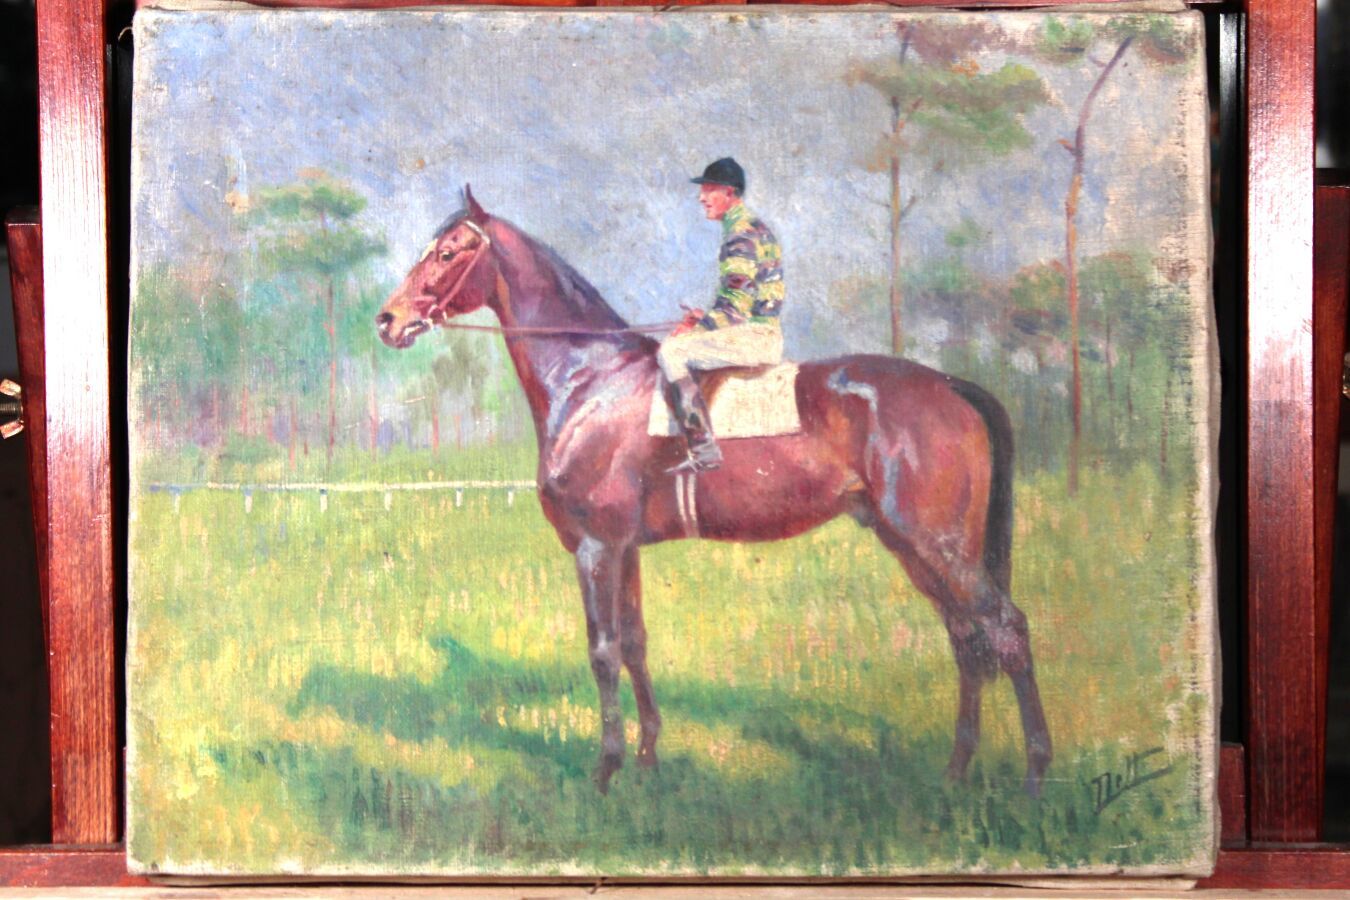 Null Odette DURAND (1885-1972) known as DETT

"Portrait of a race horse

Oil on &hellip;